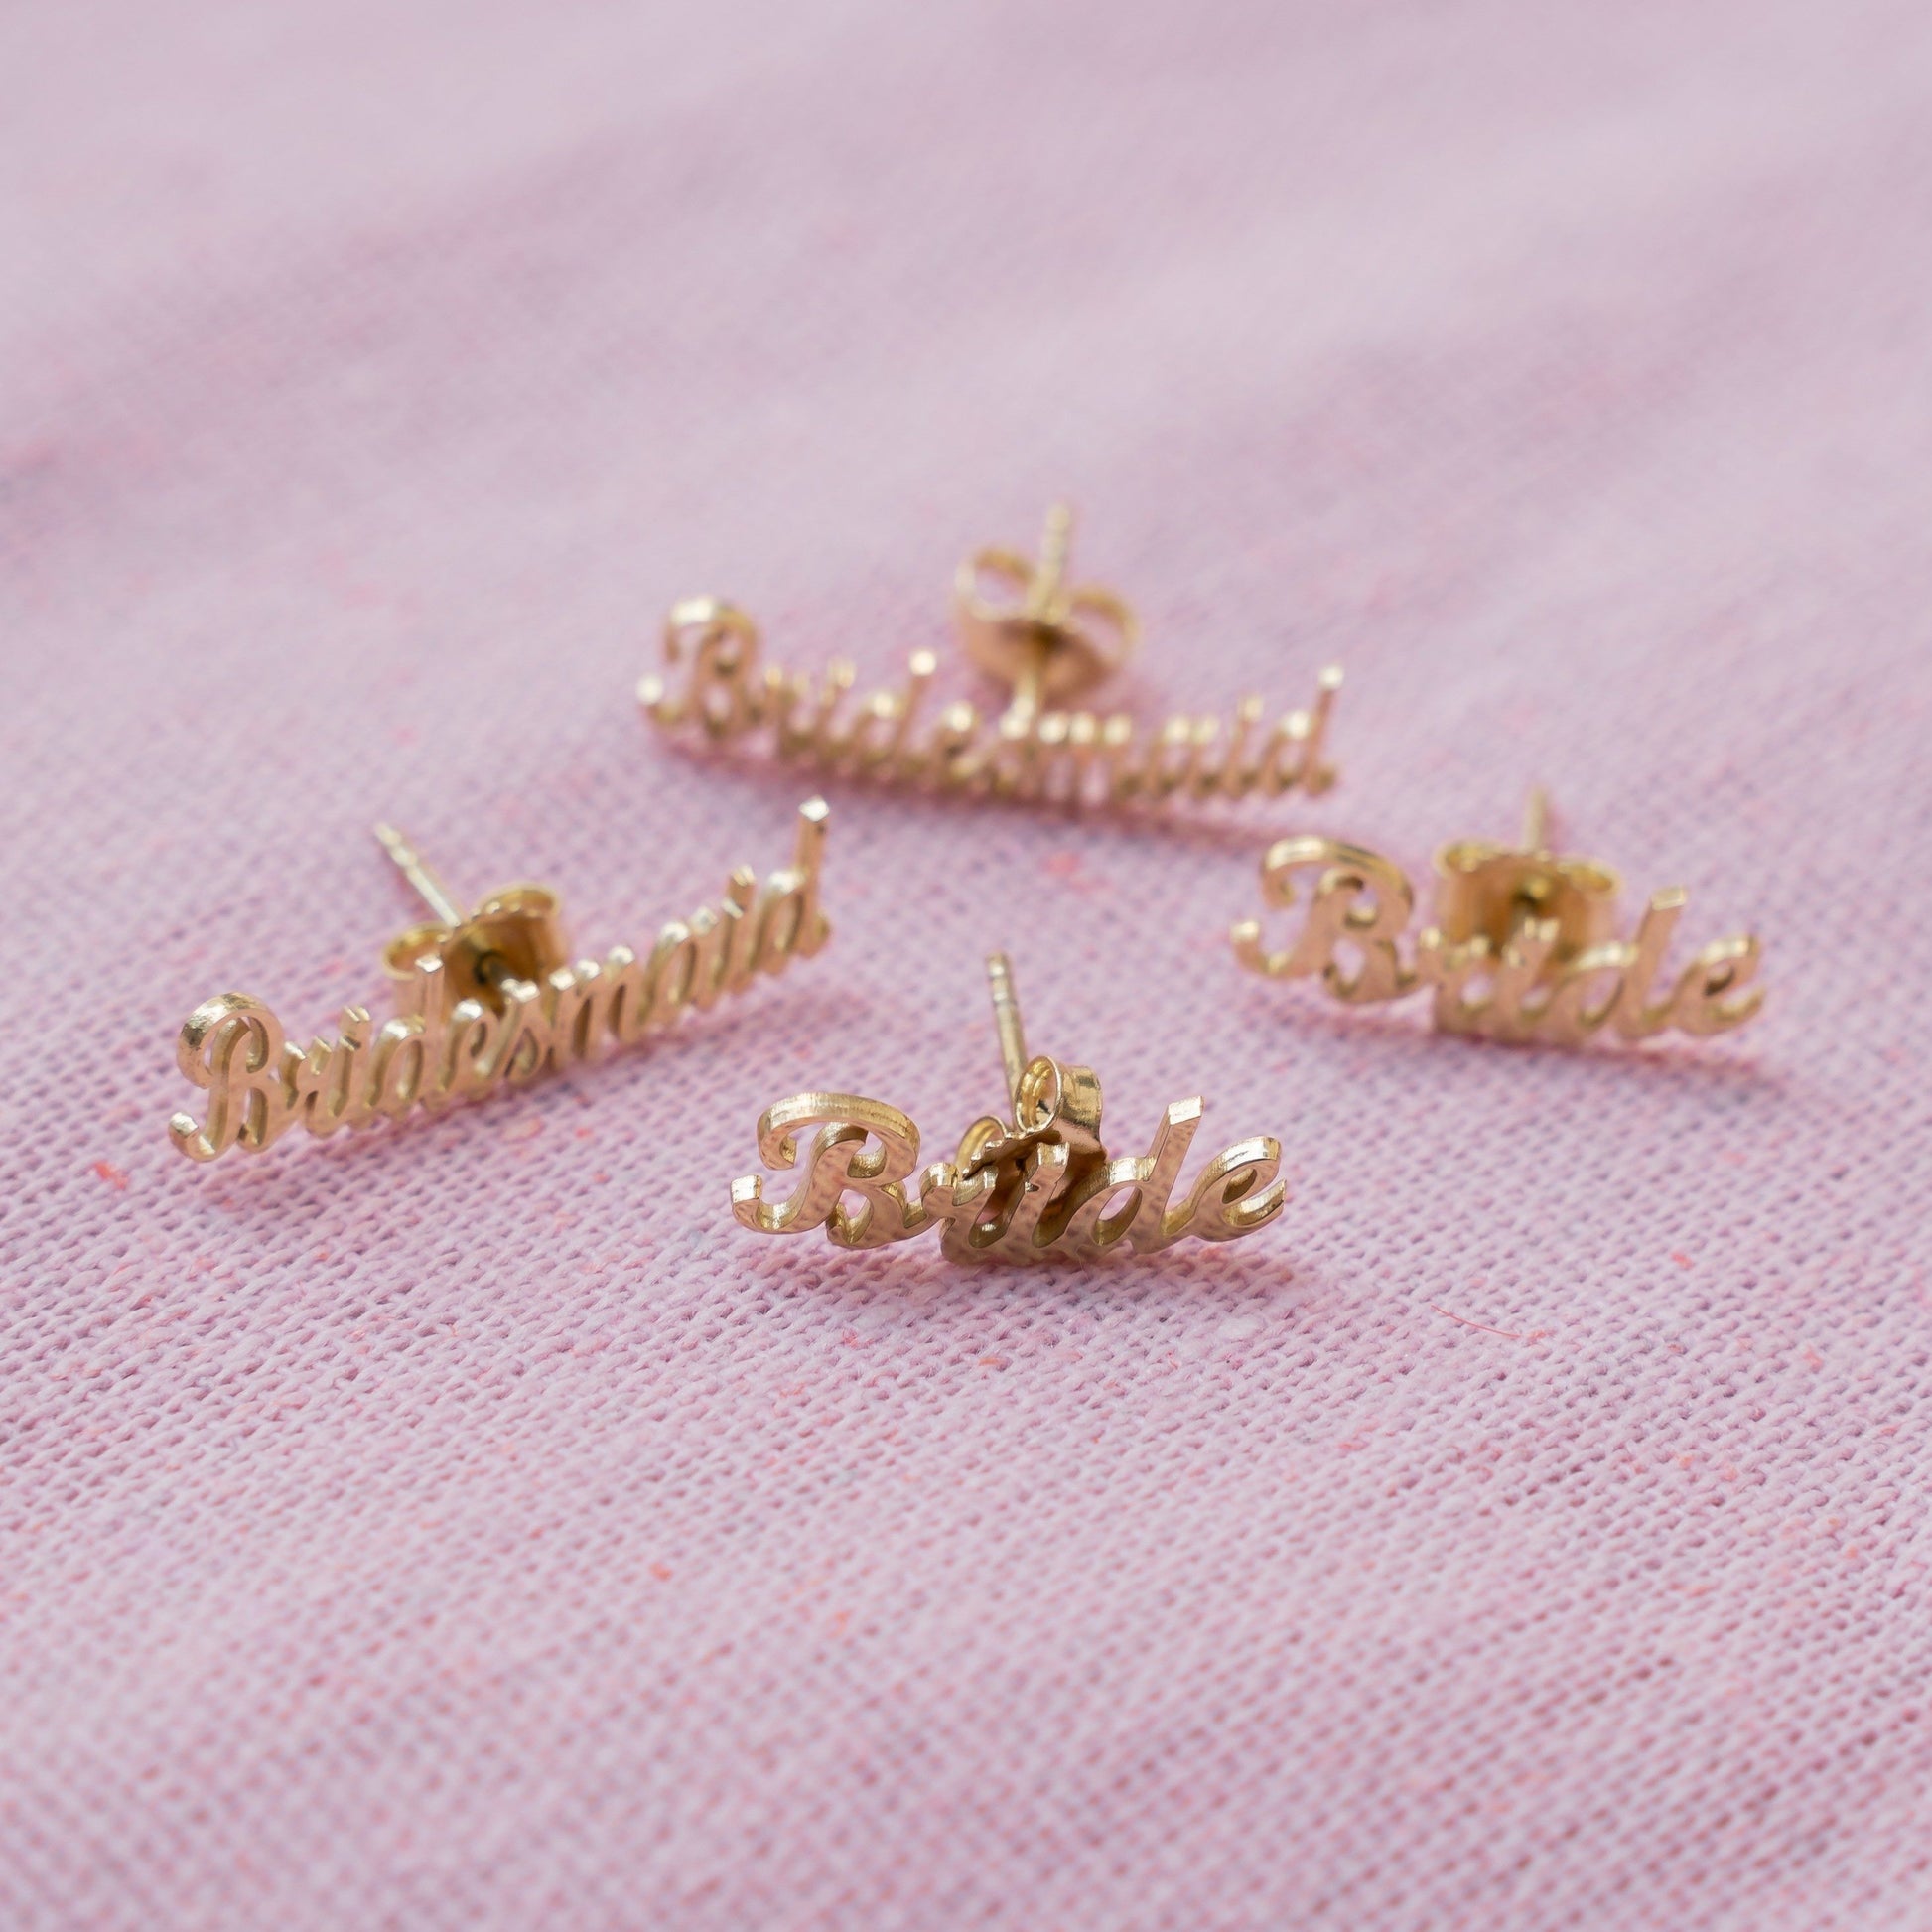 Bride + Bridesmaid Earring Crawlers - PREORDER JEWELRY The Sis Kiss